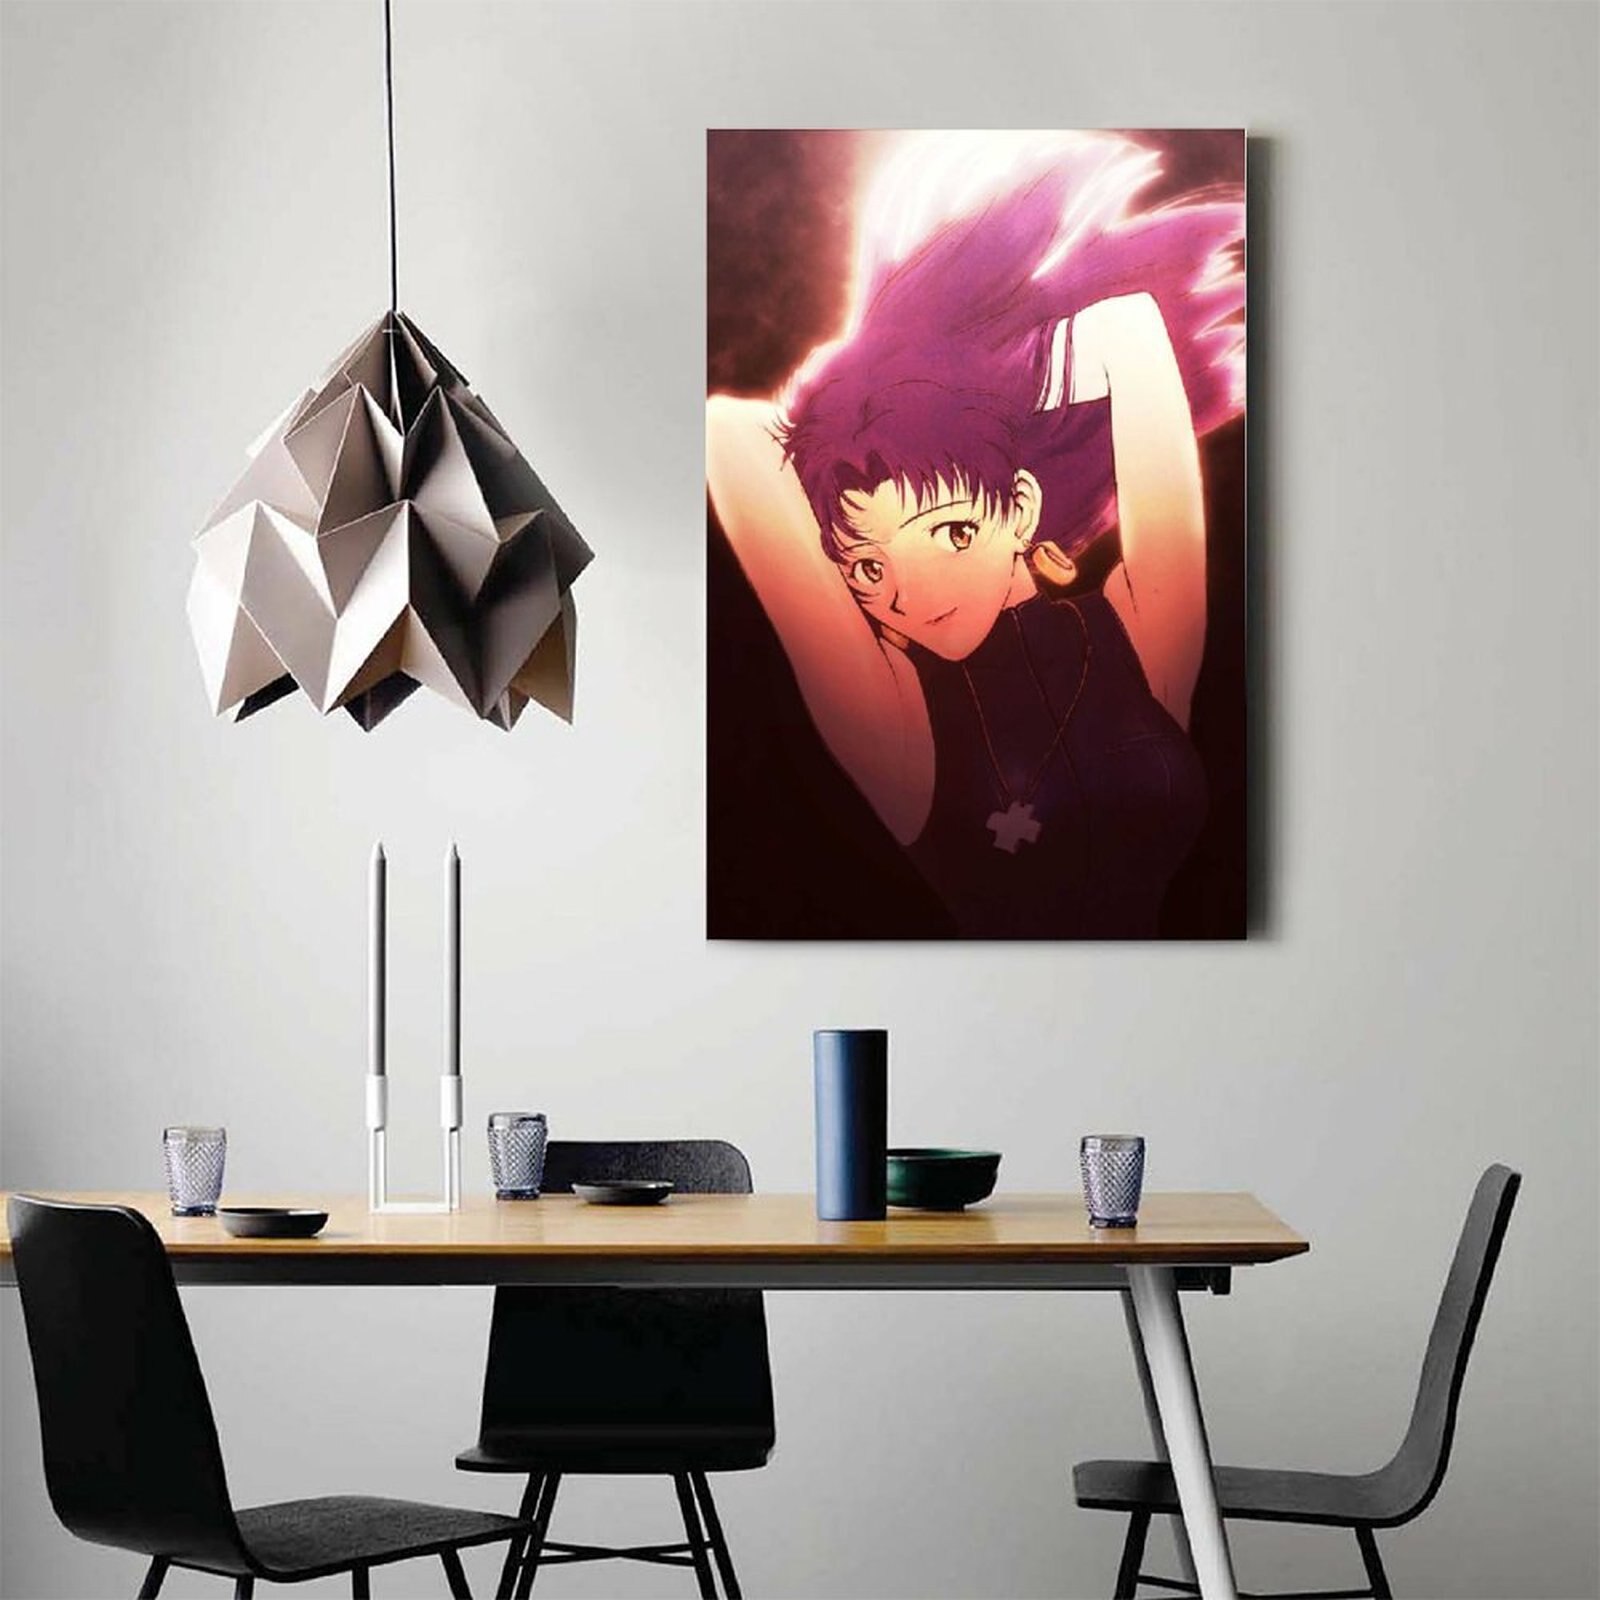 Anime Evangelion Misato GirlCanvas Painting Wall Art Posters and Prints Wall Pictures for Living Room Decoration 2 - Evangelion Shop